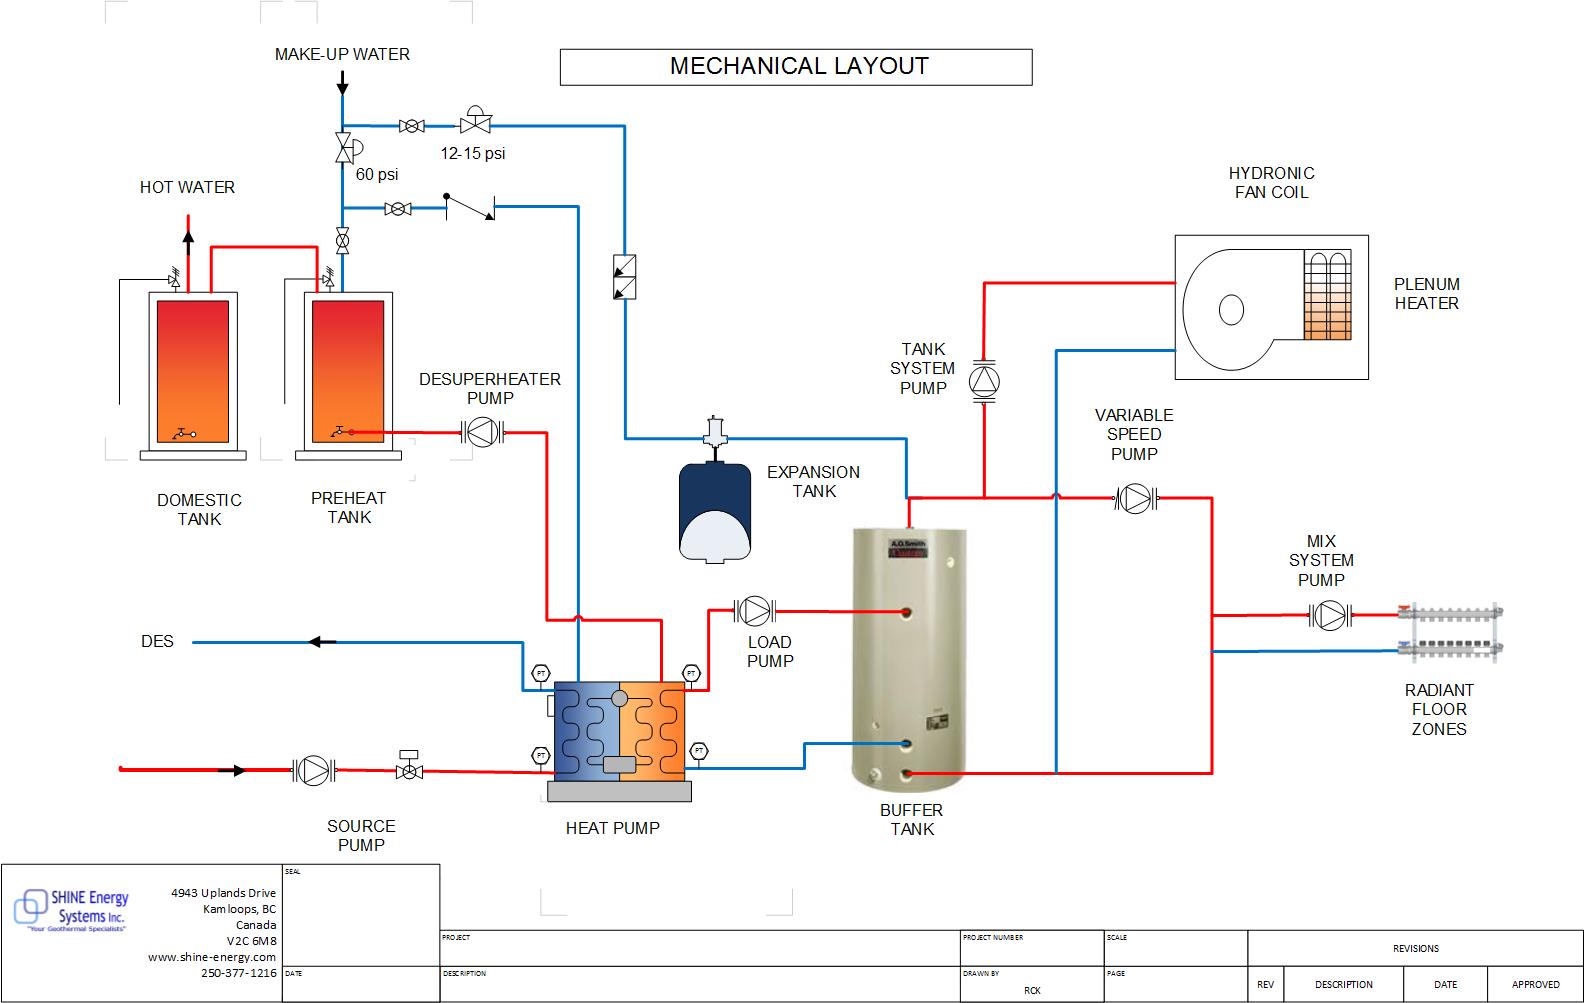 Water to Heat Pump + Fan Coil + Radiant Floor Schematic ... household wiring diagrams simple 